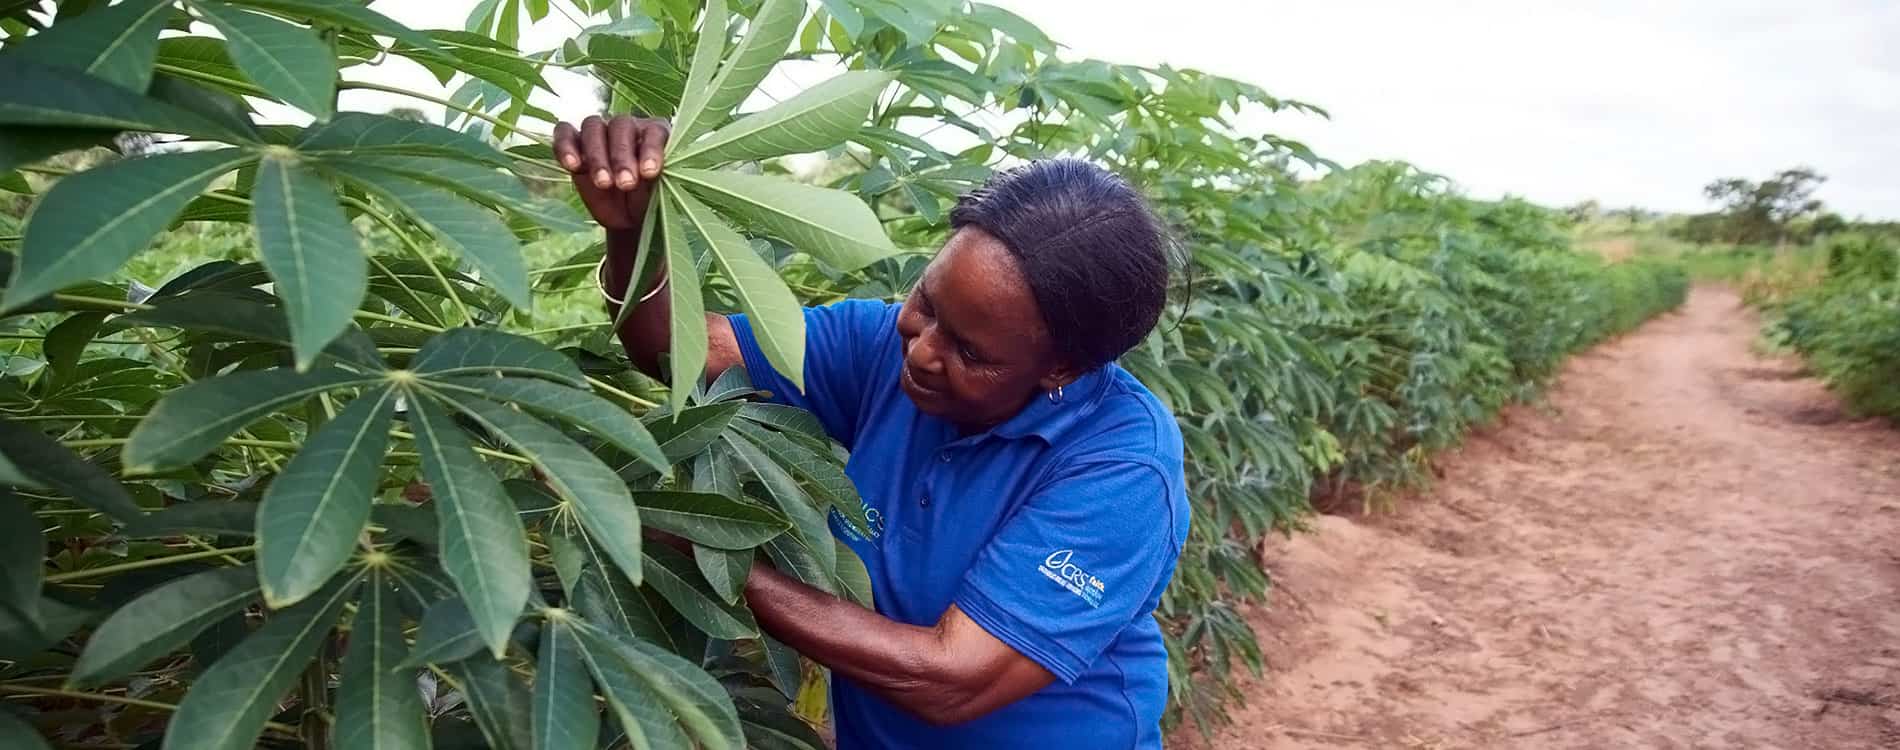 Project to build sustainable cassava seed system in Africa gets new phase